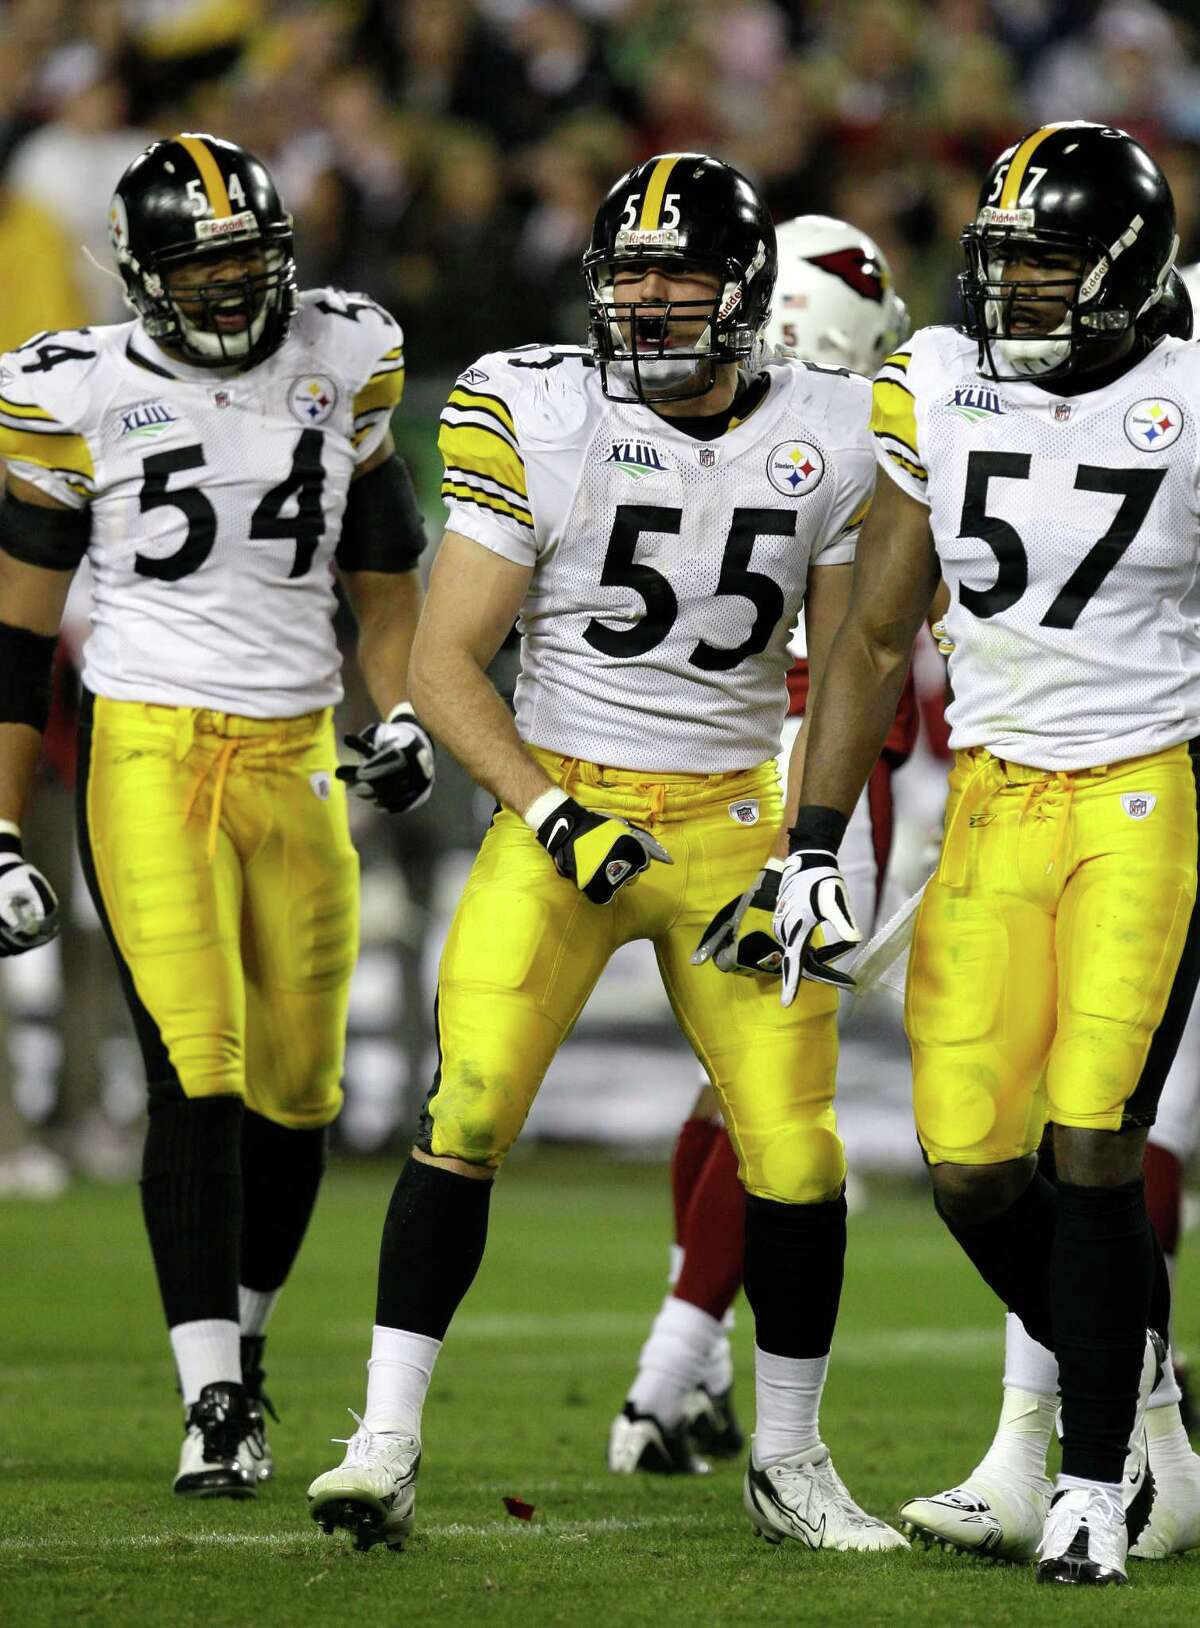 Patrick Bailey, Alamo Heights High School Won Super Bowl XLIII with the Pittsburgh Steelers and is currently an unsigned free agent.